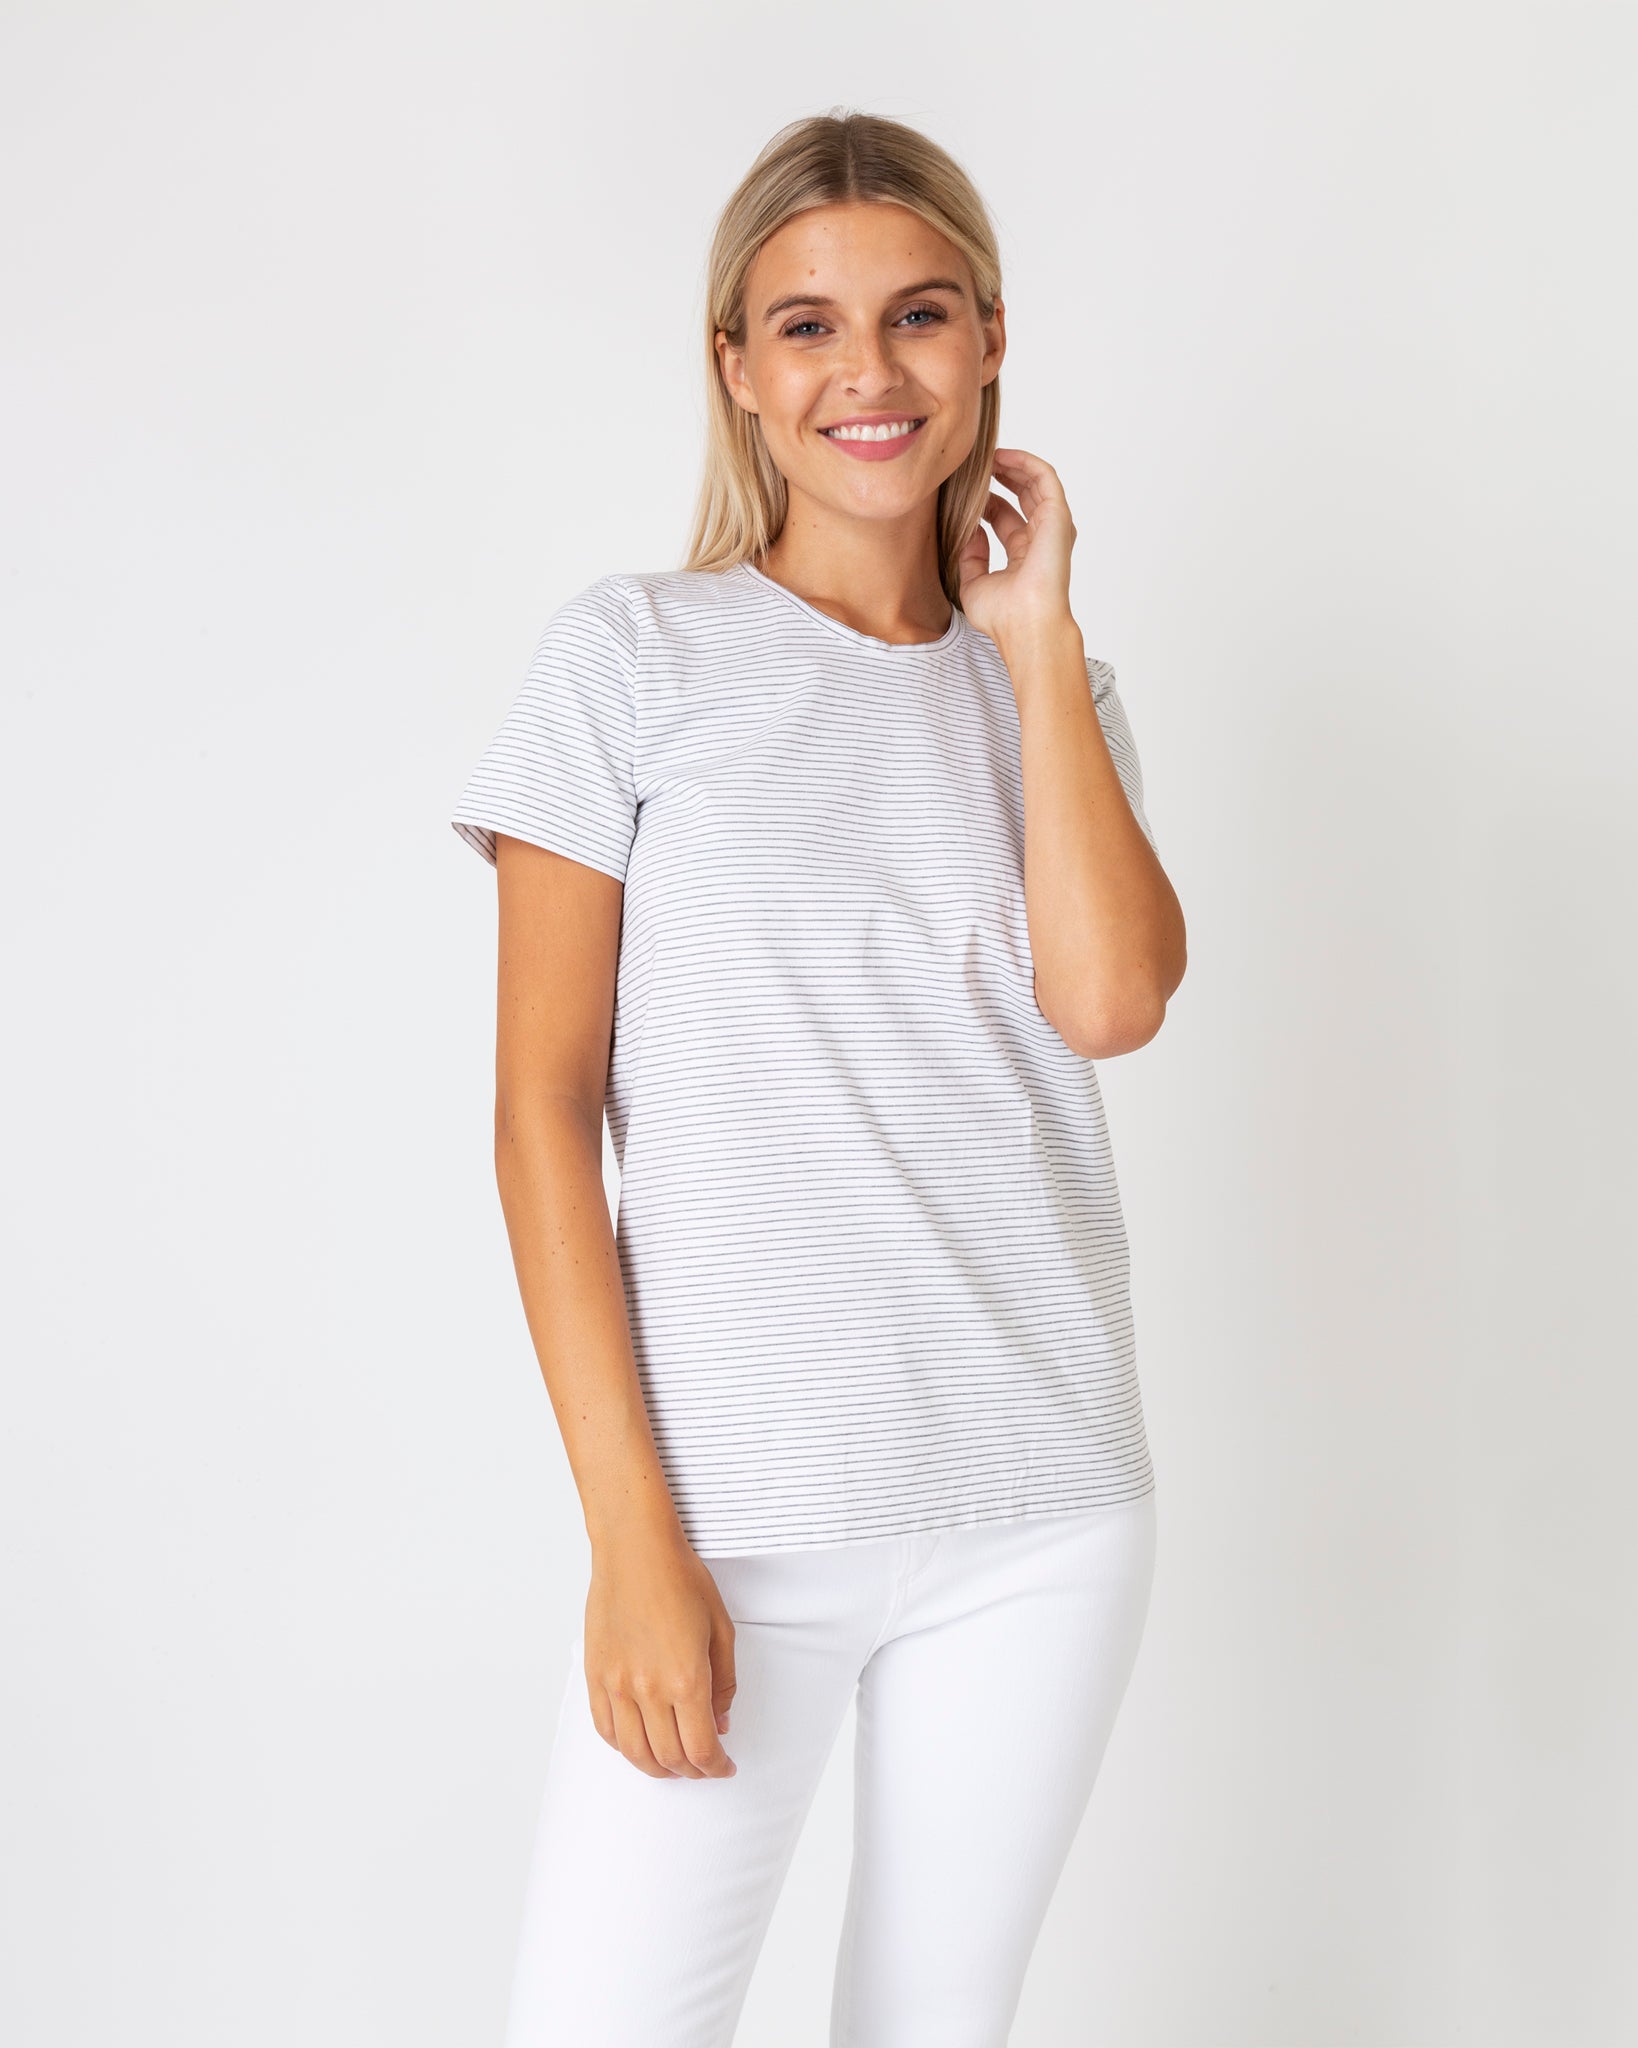 Short-Sleeved Relaxed Tee in White/Heather Grey Stripe Jersey